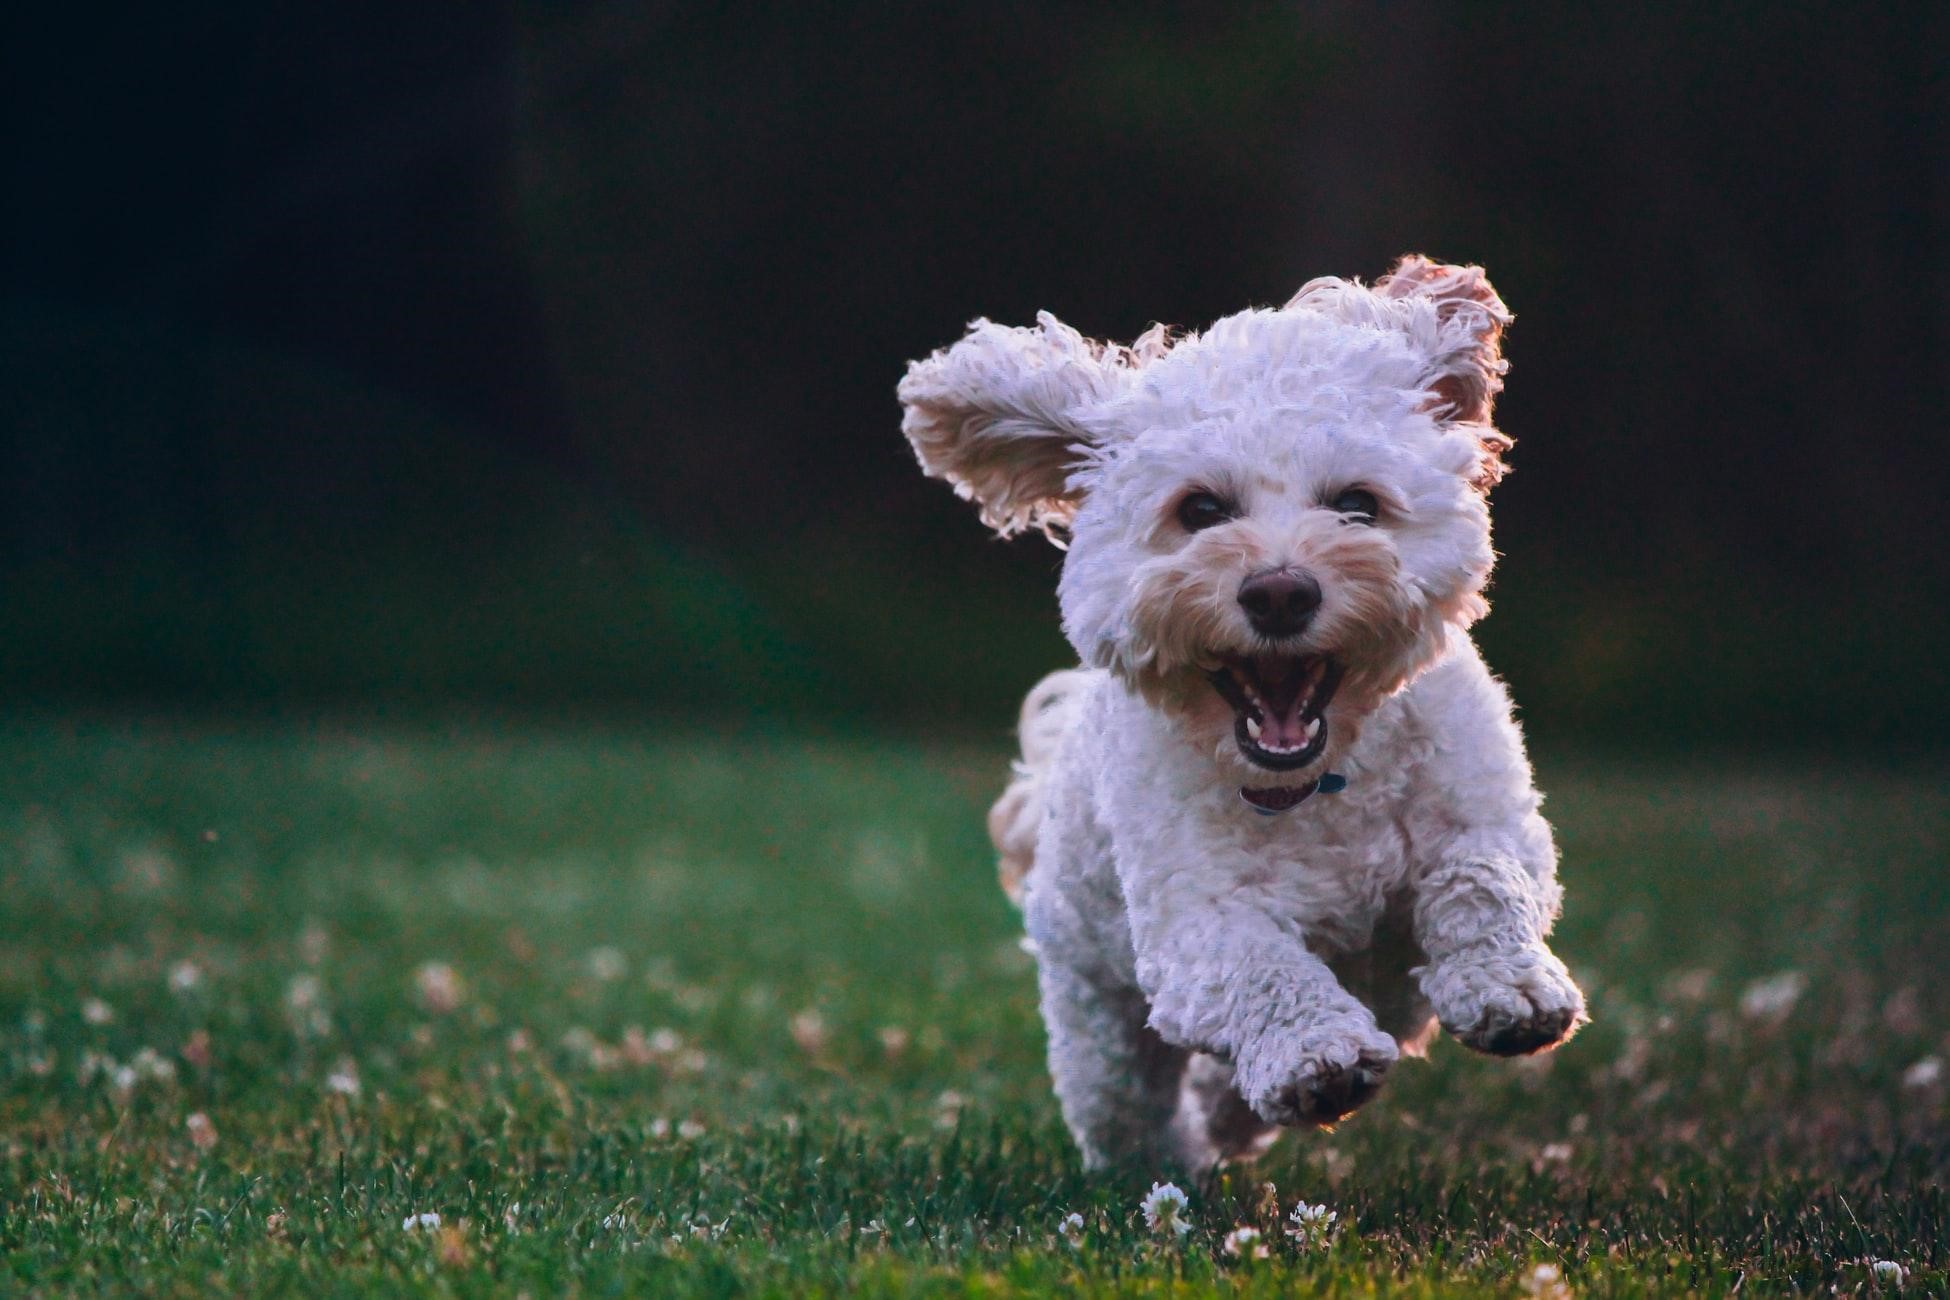 A happy dog is running in a grassy field.